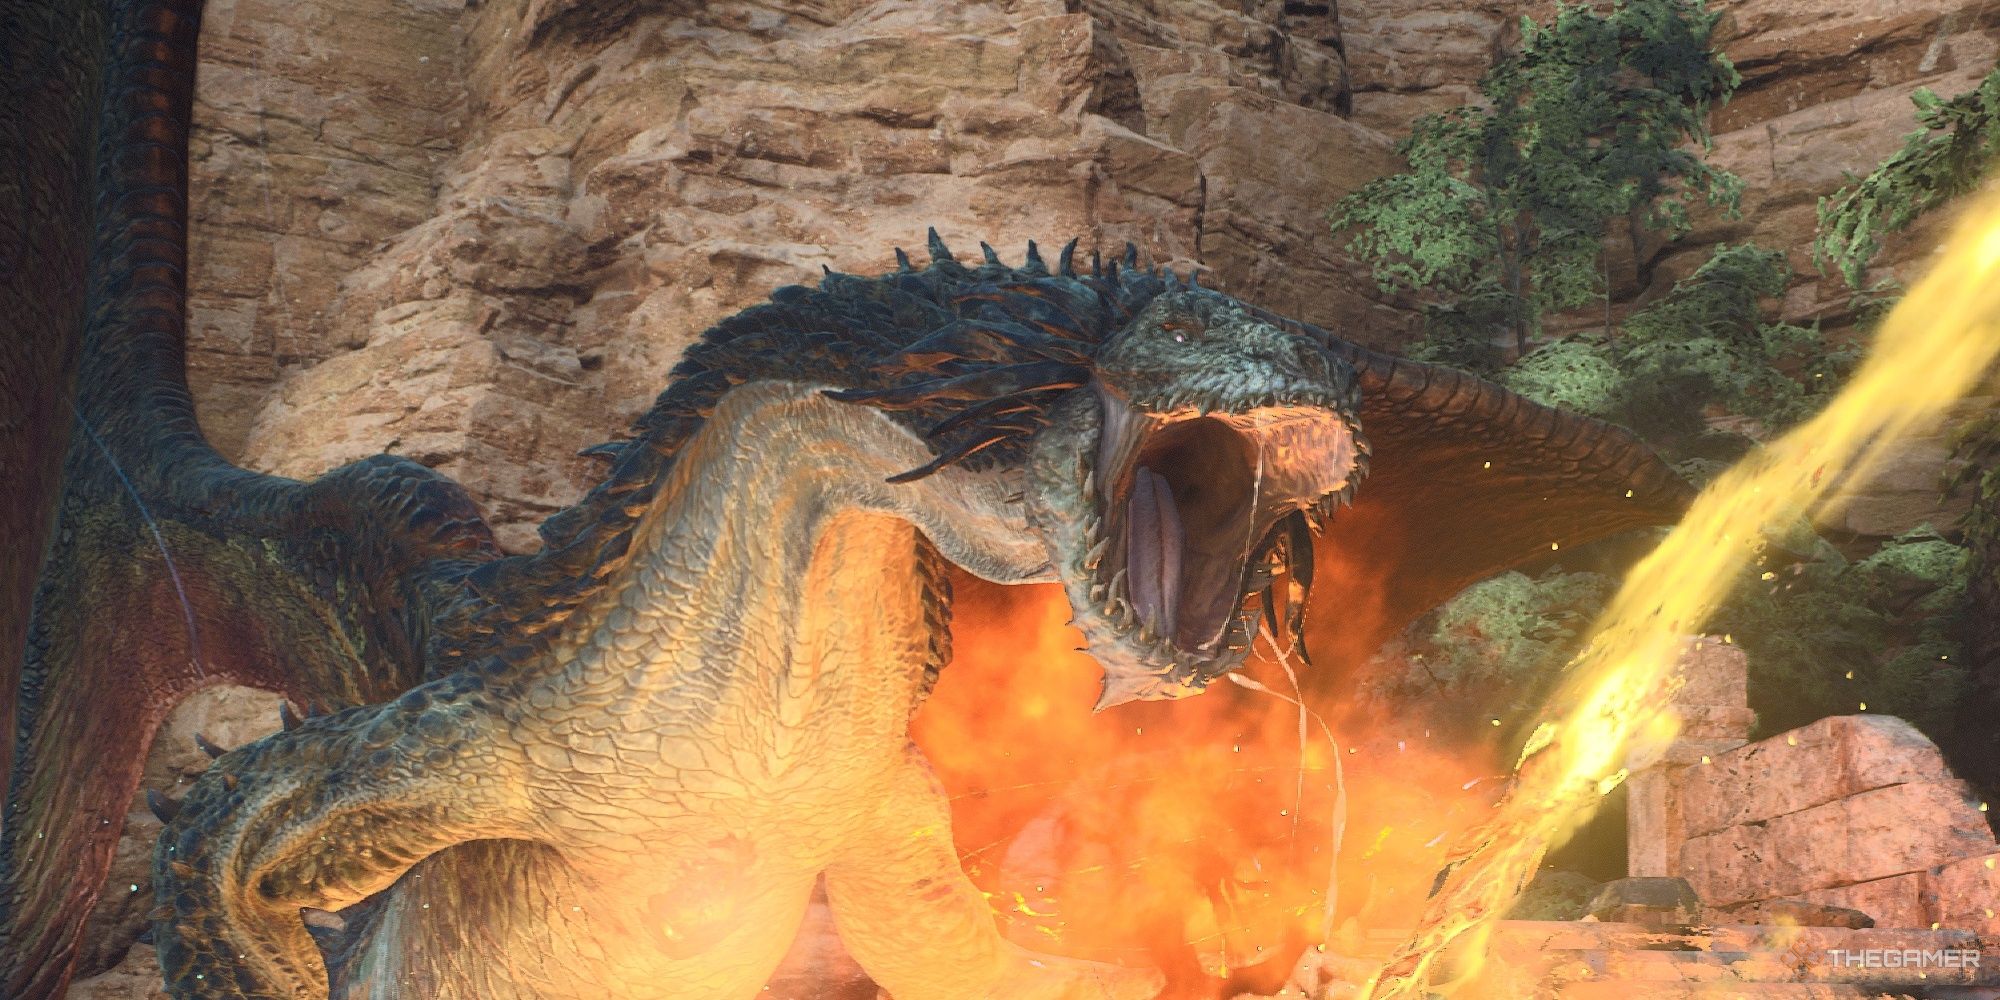 A Drake roars with fire exploding behind it in Dragon's Dogma 2.